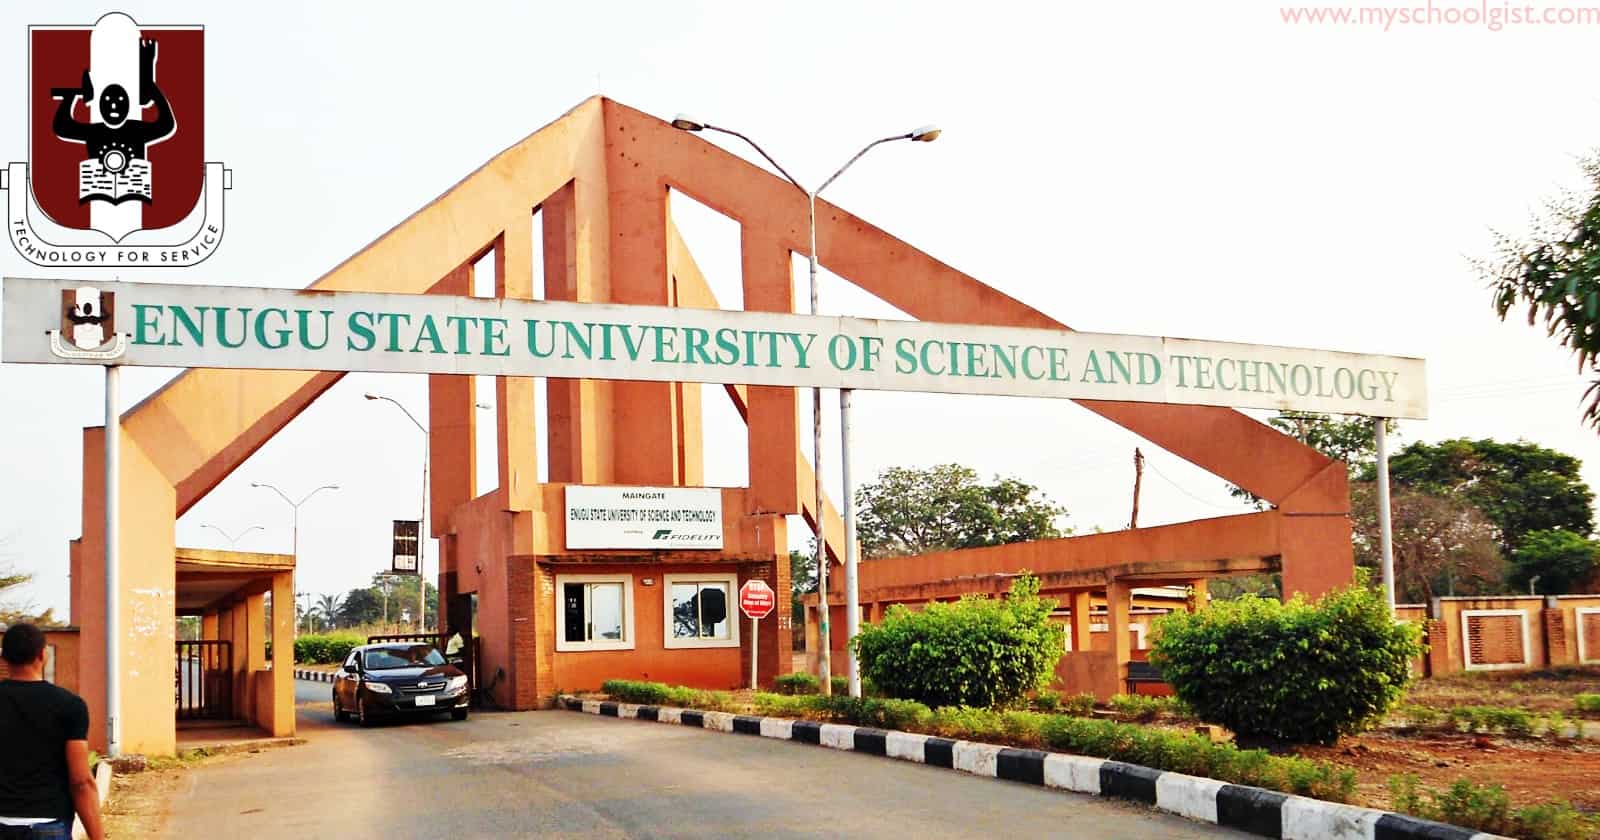 ESUT School Fees, Admission Requirements, Hostel Accommodation And List Of  Courses Offered » JustSchooling